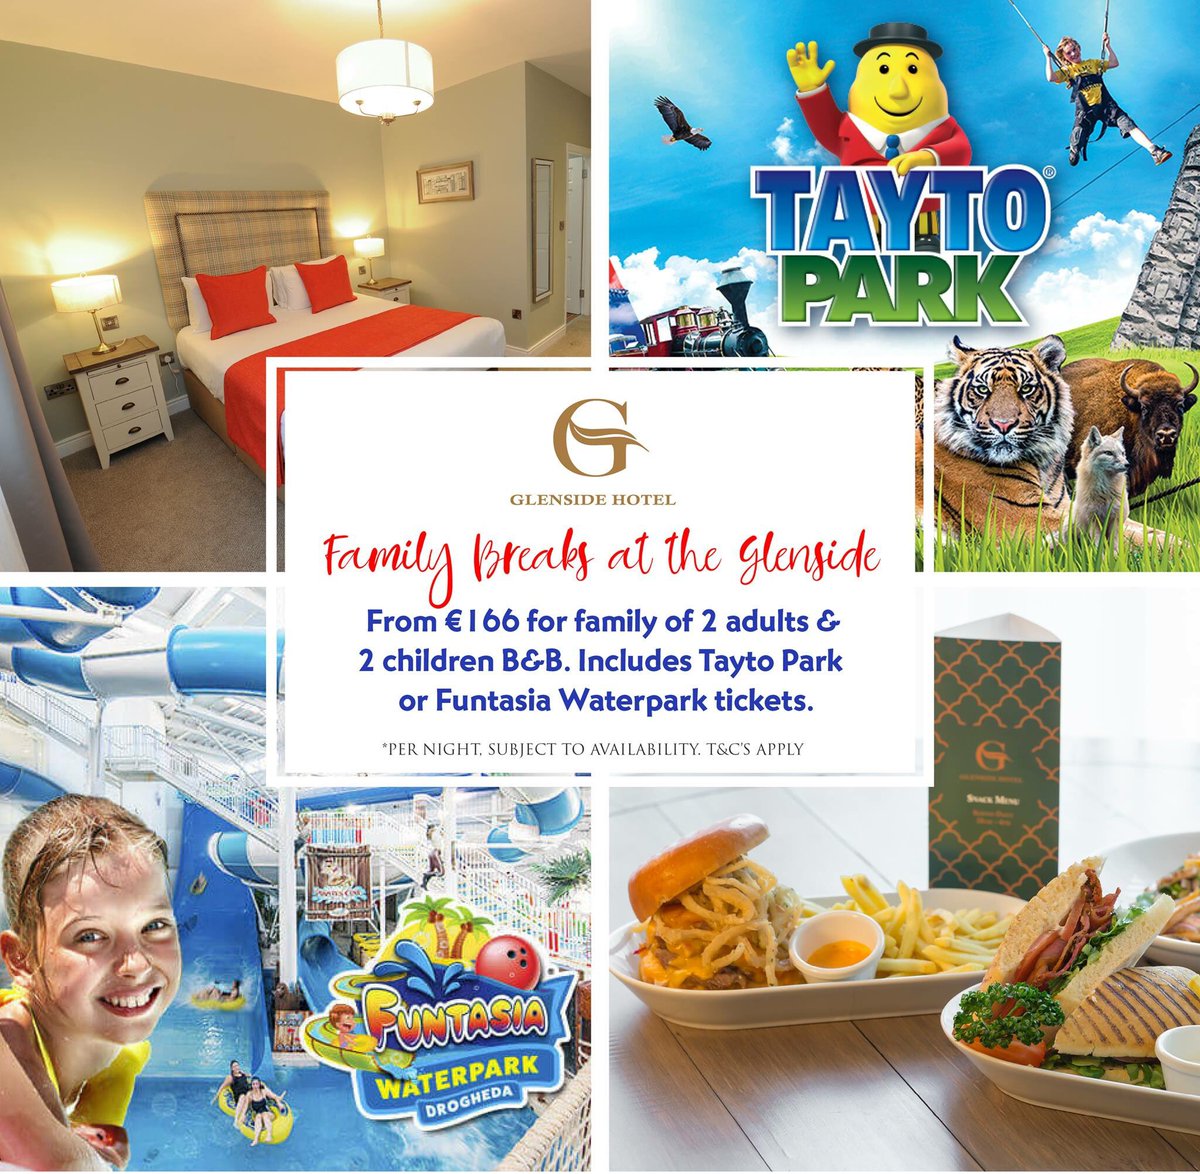 Family Packages at the Glenside Hotel from €166 for family of 2 adults 2 children.  Includes Tayto Park or Funtasia Waterpark tickets.
Book Now: glensidehotel.ie #holidays #louthchat #taytopark #funtasia #familybreaks #family #antainarts